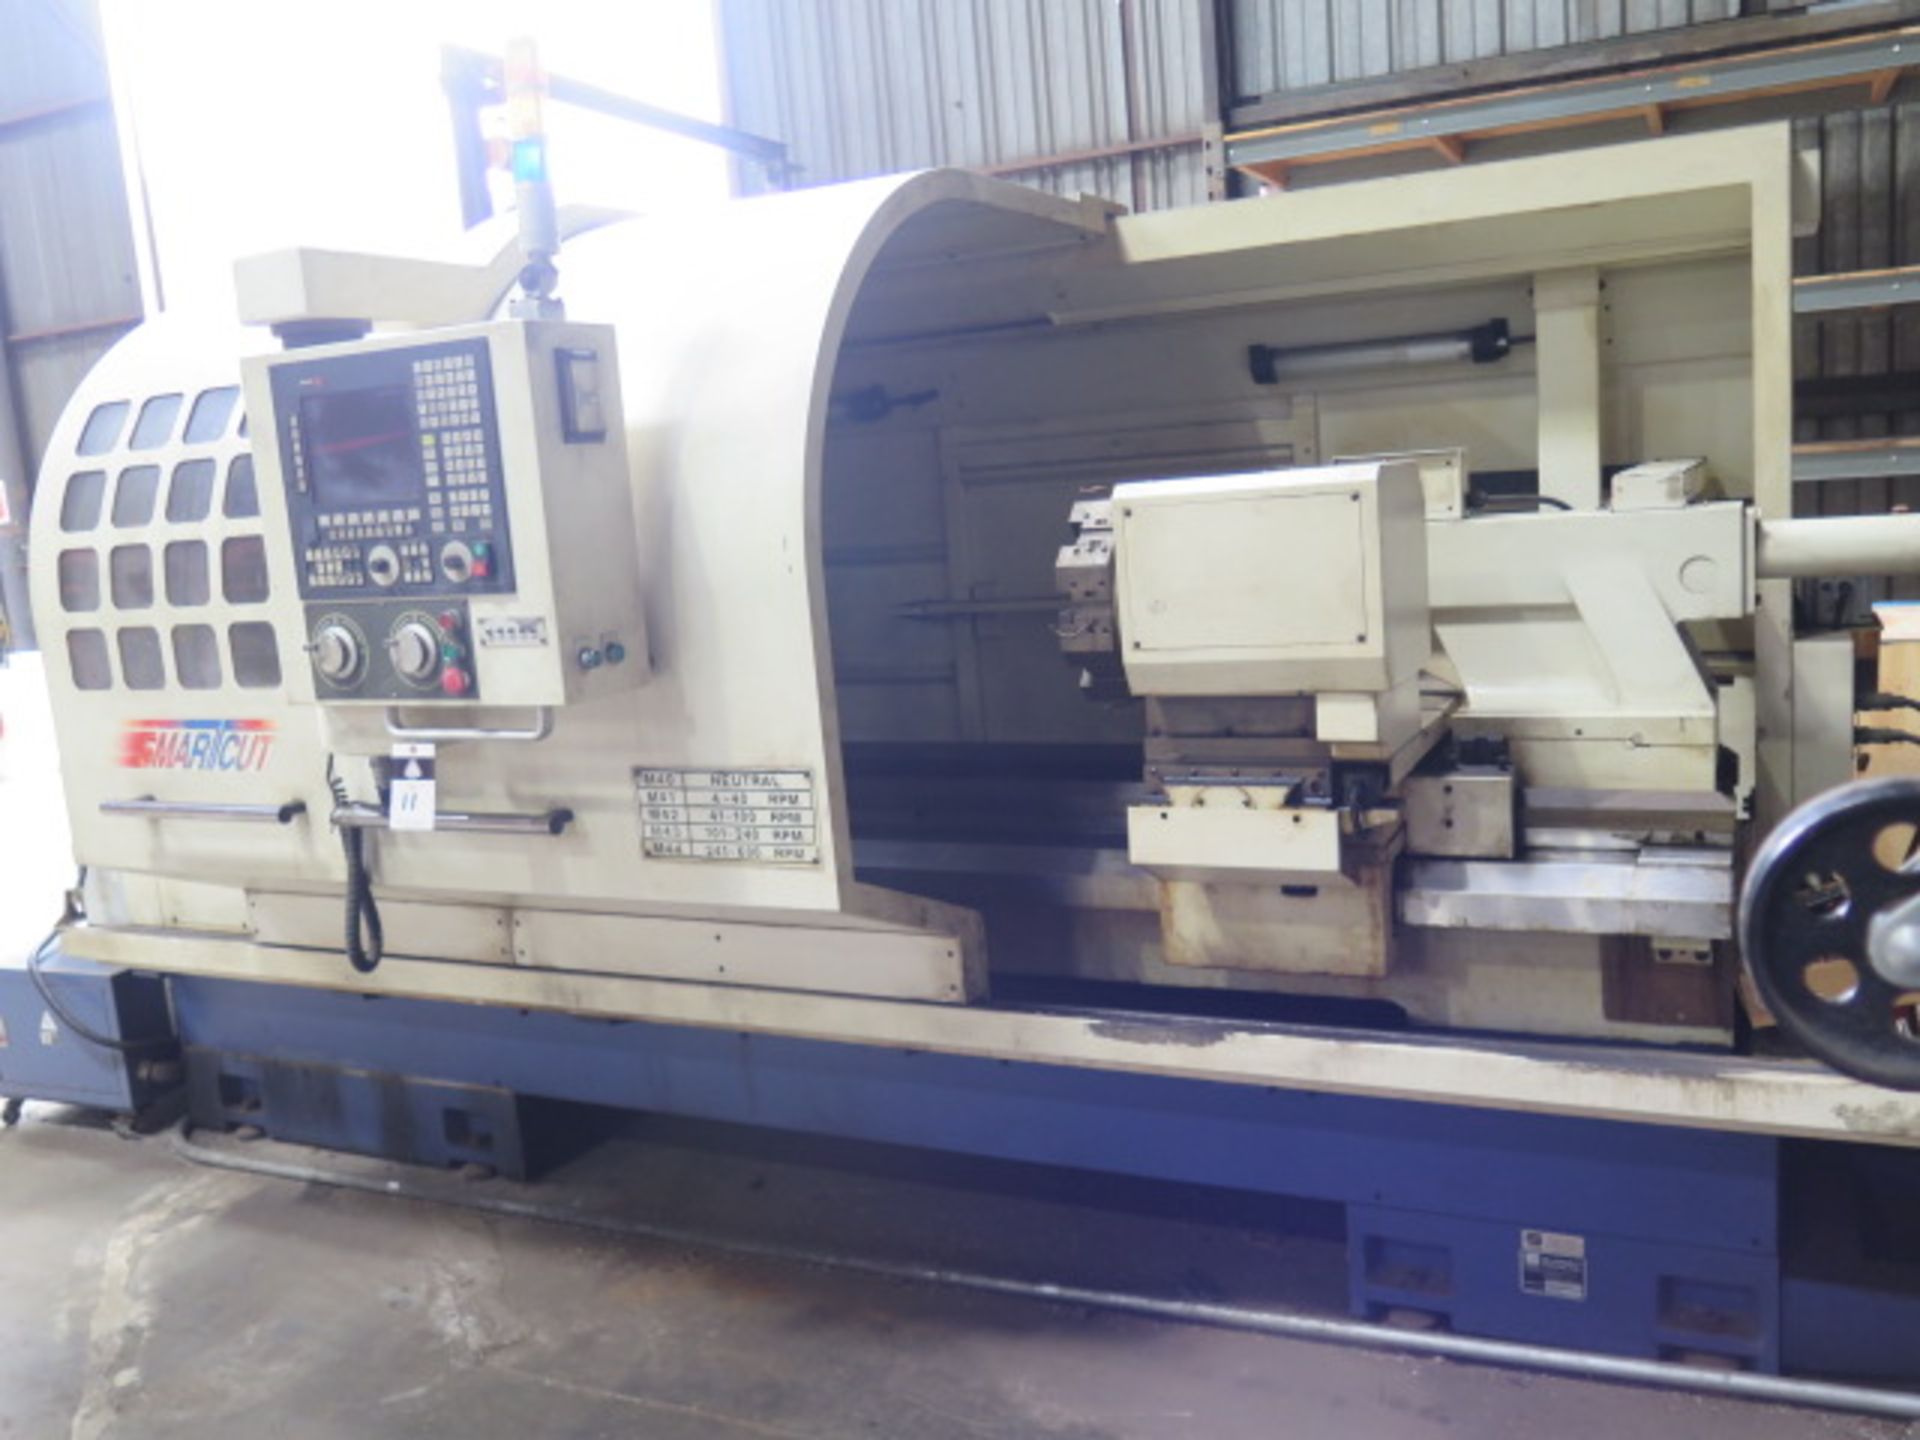 Summit “Smart Cut” SC30-9X80M Big Bore CNC Turning Center,Fagor Controls, 9” Spindle Bore,SOLD AS IS - Image 3 of 26